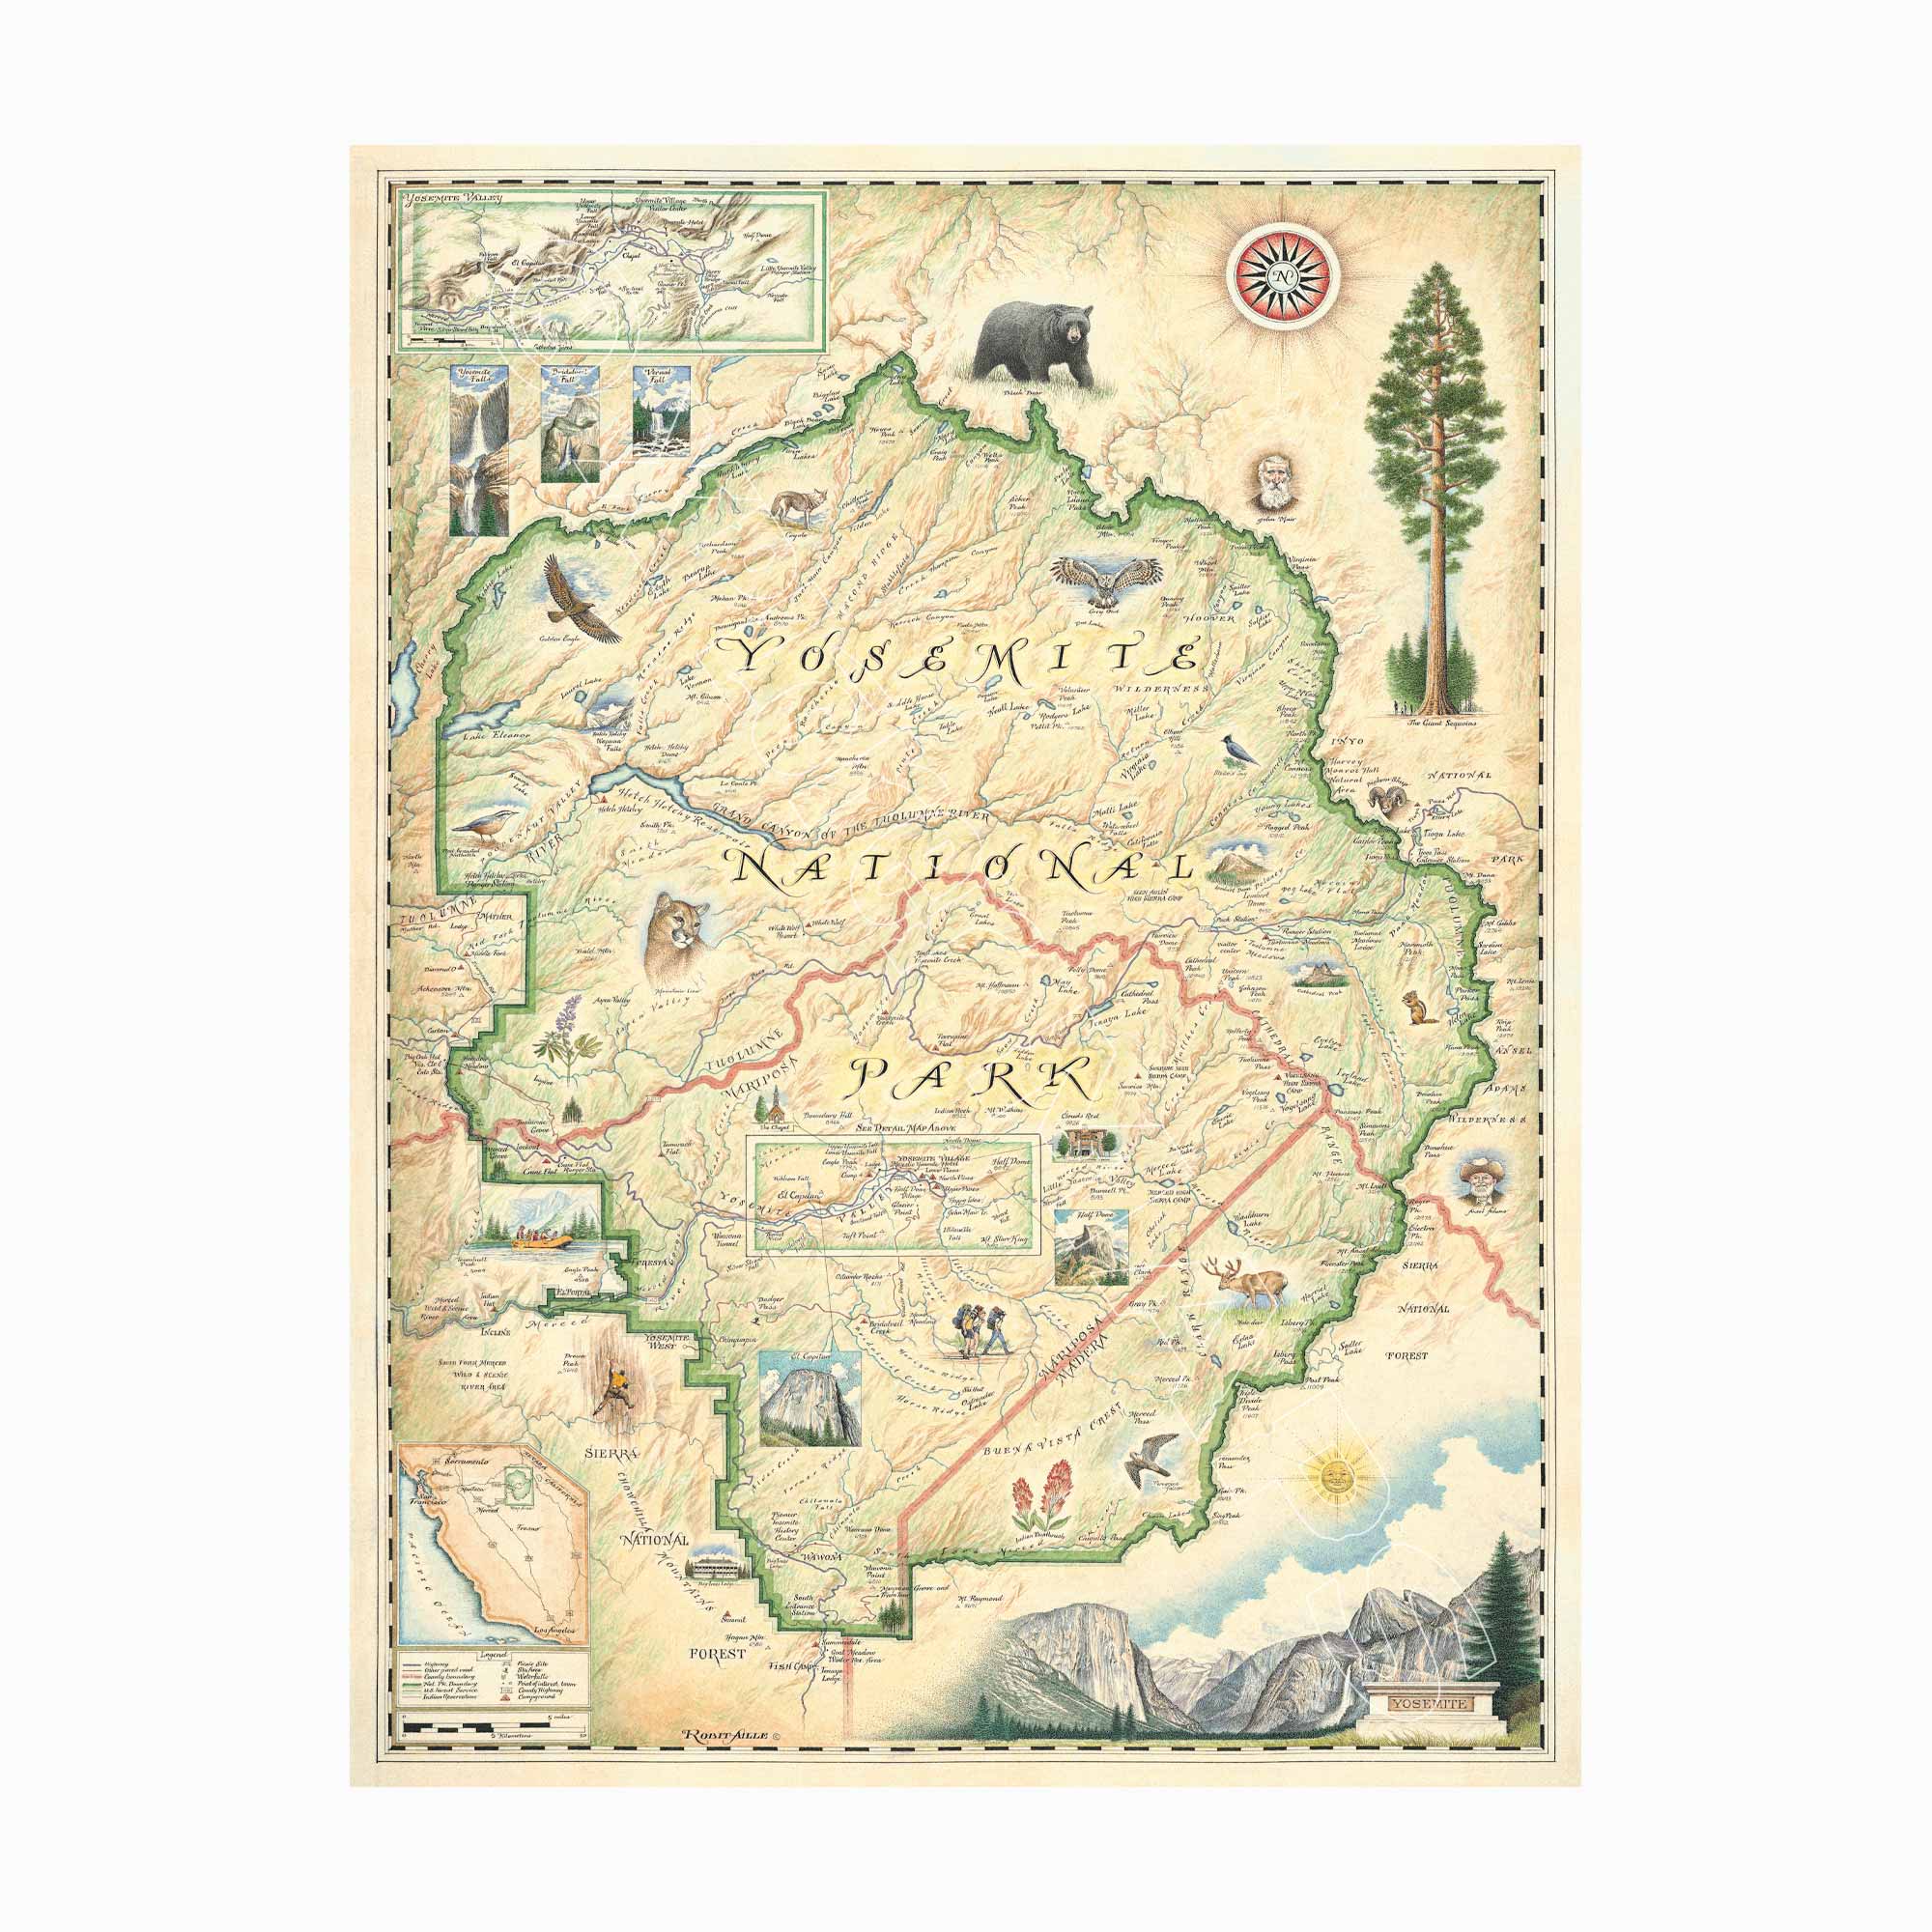 Yosemite National Park hand-drawn map in earth tones beige and green. The map features illustrations of places such as Vernall falls, El Capitan, and Half Dome. Flora and fauna include mule deer, indian paintbrush, grey owl, and coyote. Other illustrations include John Muir, mountain climbing, hiking, and Ansel Adams. Measures 18x24.